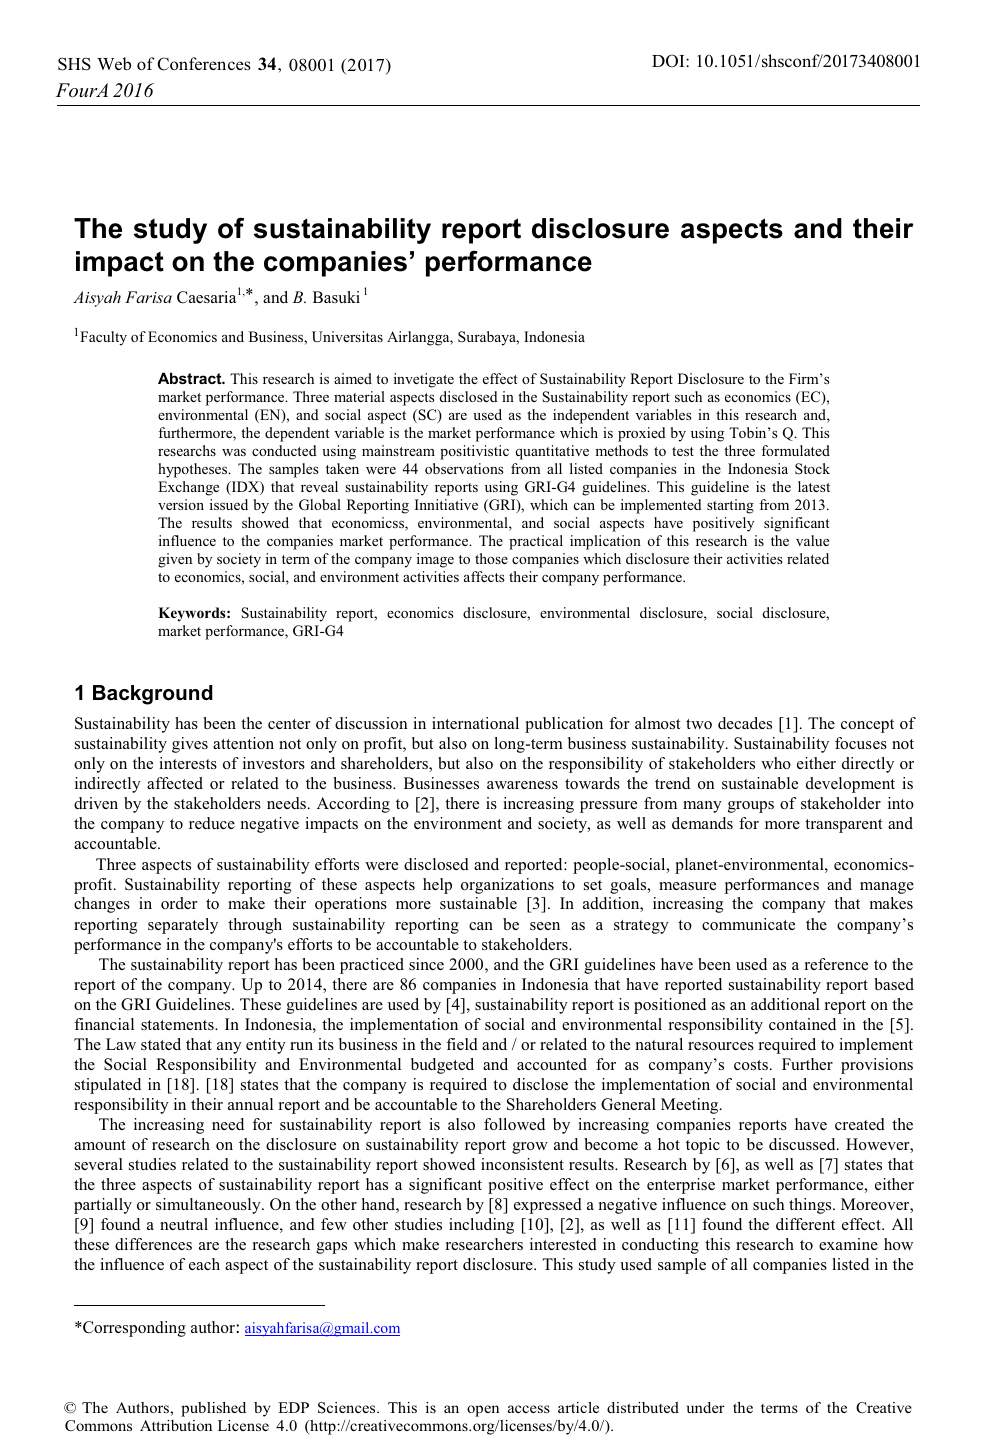 The Study Of Sustainability Report Disclosure Aspects And Their Impact On The Companies Performance Topic Of Research Paper In Economics And Business Download Scholarly Article Pdf And Read For Free On